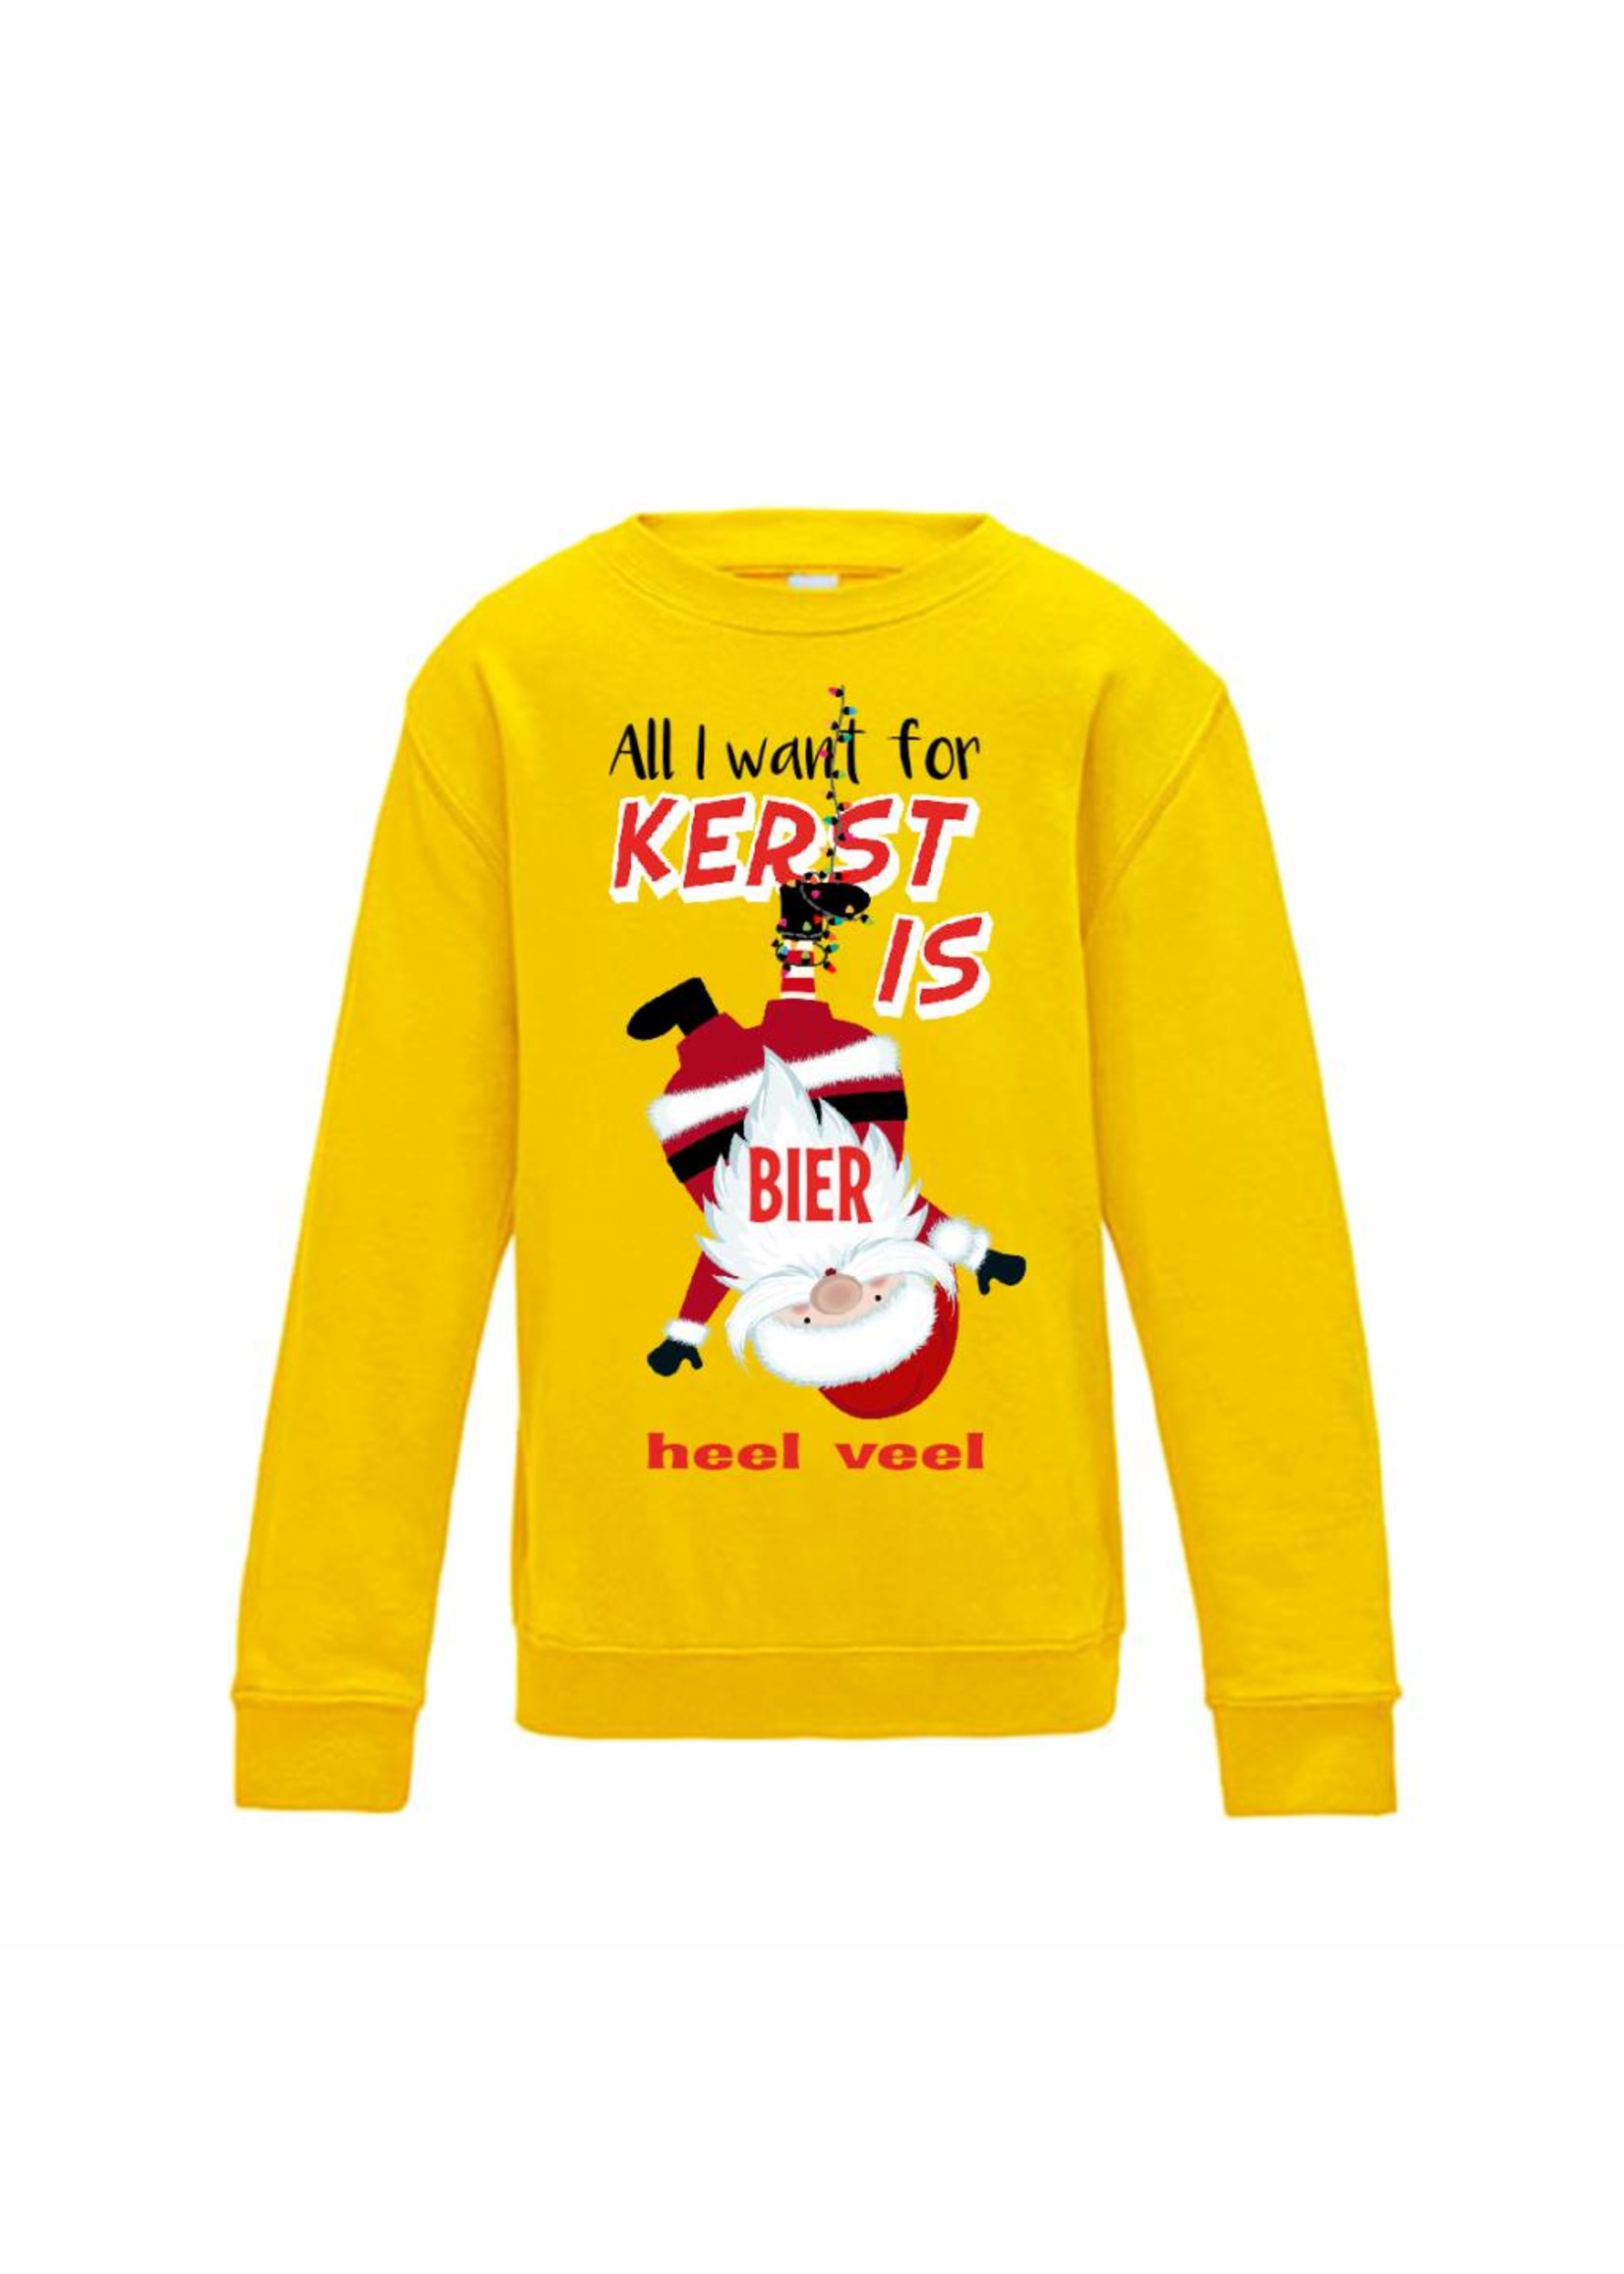 All I want for kerst is wijn kerst sweater